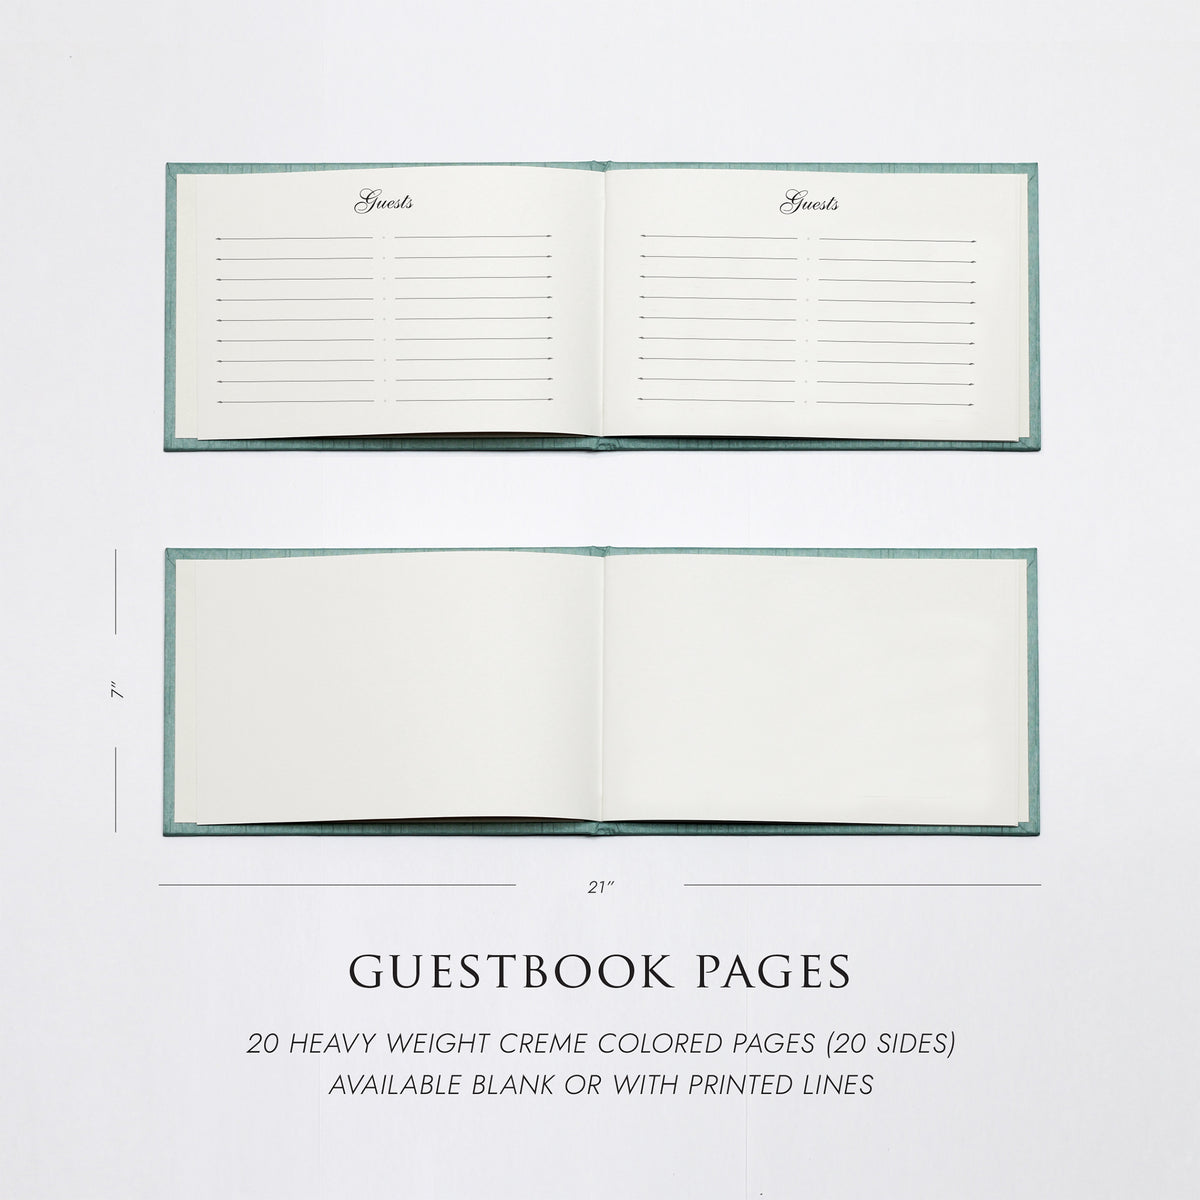 Guestbook Embossed with “Guests” | Cover: Natural Linen | Available Personalized